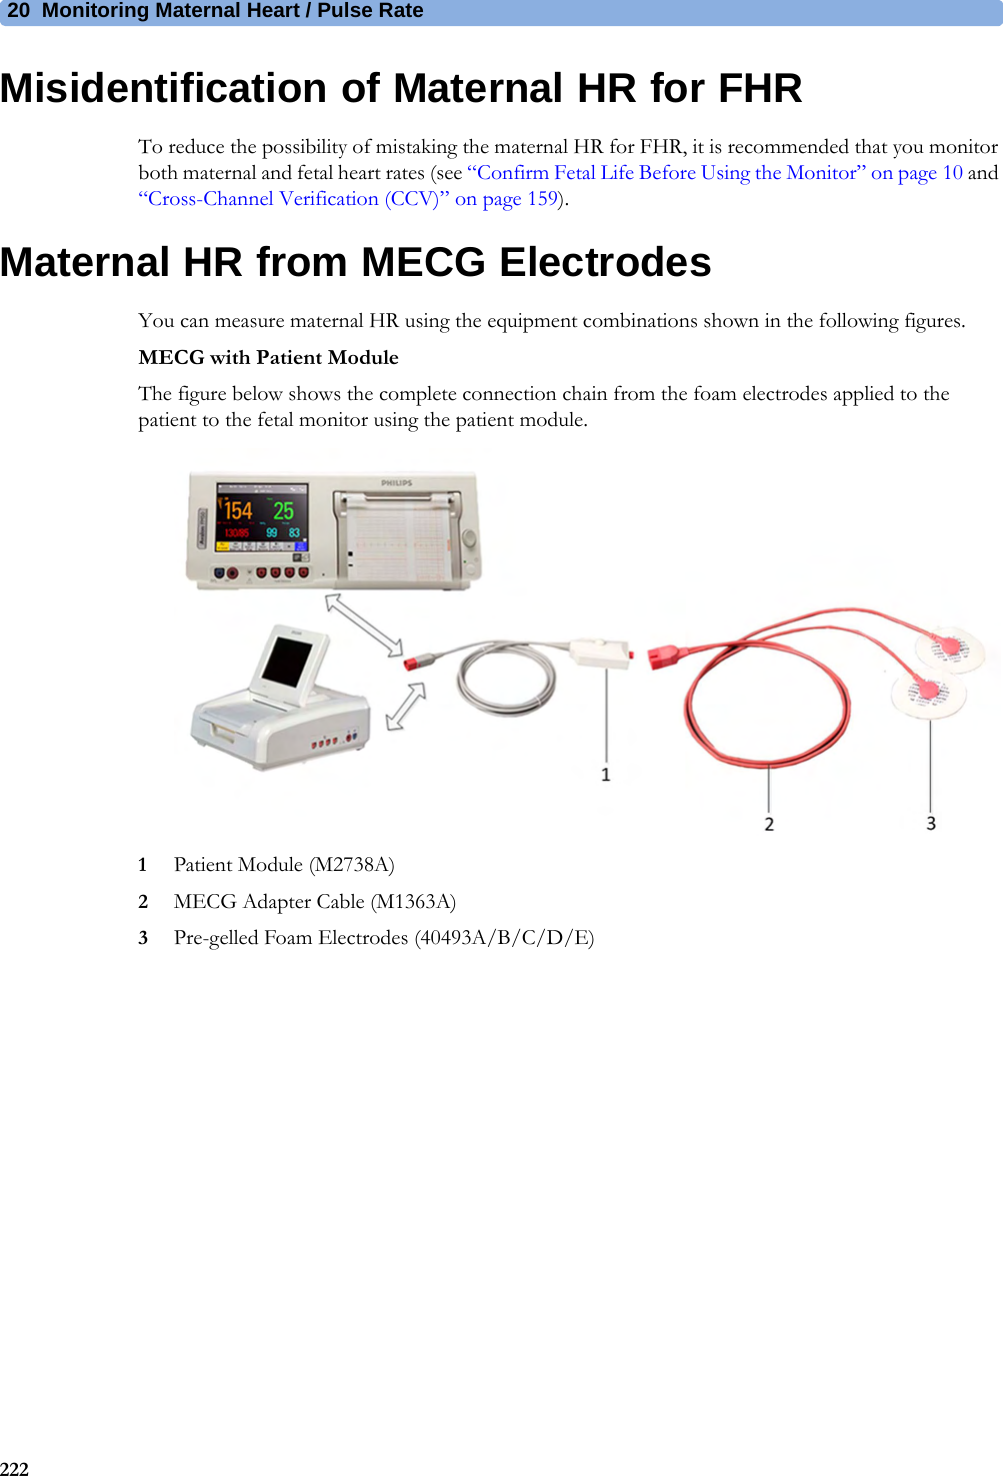 20  Monitoring Maternal Heart / Pulse Rate222Misidentification of Maternal HR for FHRTo reduce the possibility of mistaking the maternal HR for FHR, it is recommended that you monitor both maternal and fetal heart rates (see “Confirm Fetal Life Before Using the Monitor” on page 10 and “Cross-Channel Verification (CCV)” on page 159).Maternal HR from MECG ElectrodesYou can measure maternal HR using the equipment combinations shown in the following figures.MECG with Patient ModuleThe figure below shows the complete connection chain from the foam electrodes applied to the patient to the fetal monitor using the patient module.1Patient Module (M2738A)2MECG Adapter Cable (M1363A)3Pre-gelled Foam Electrodes (40493A/B/C/D/E)